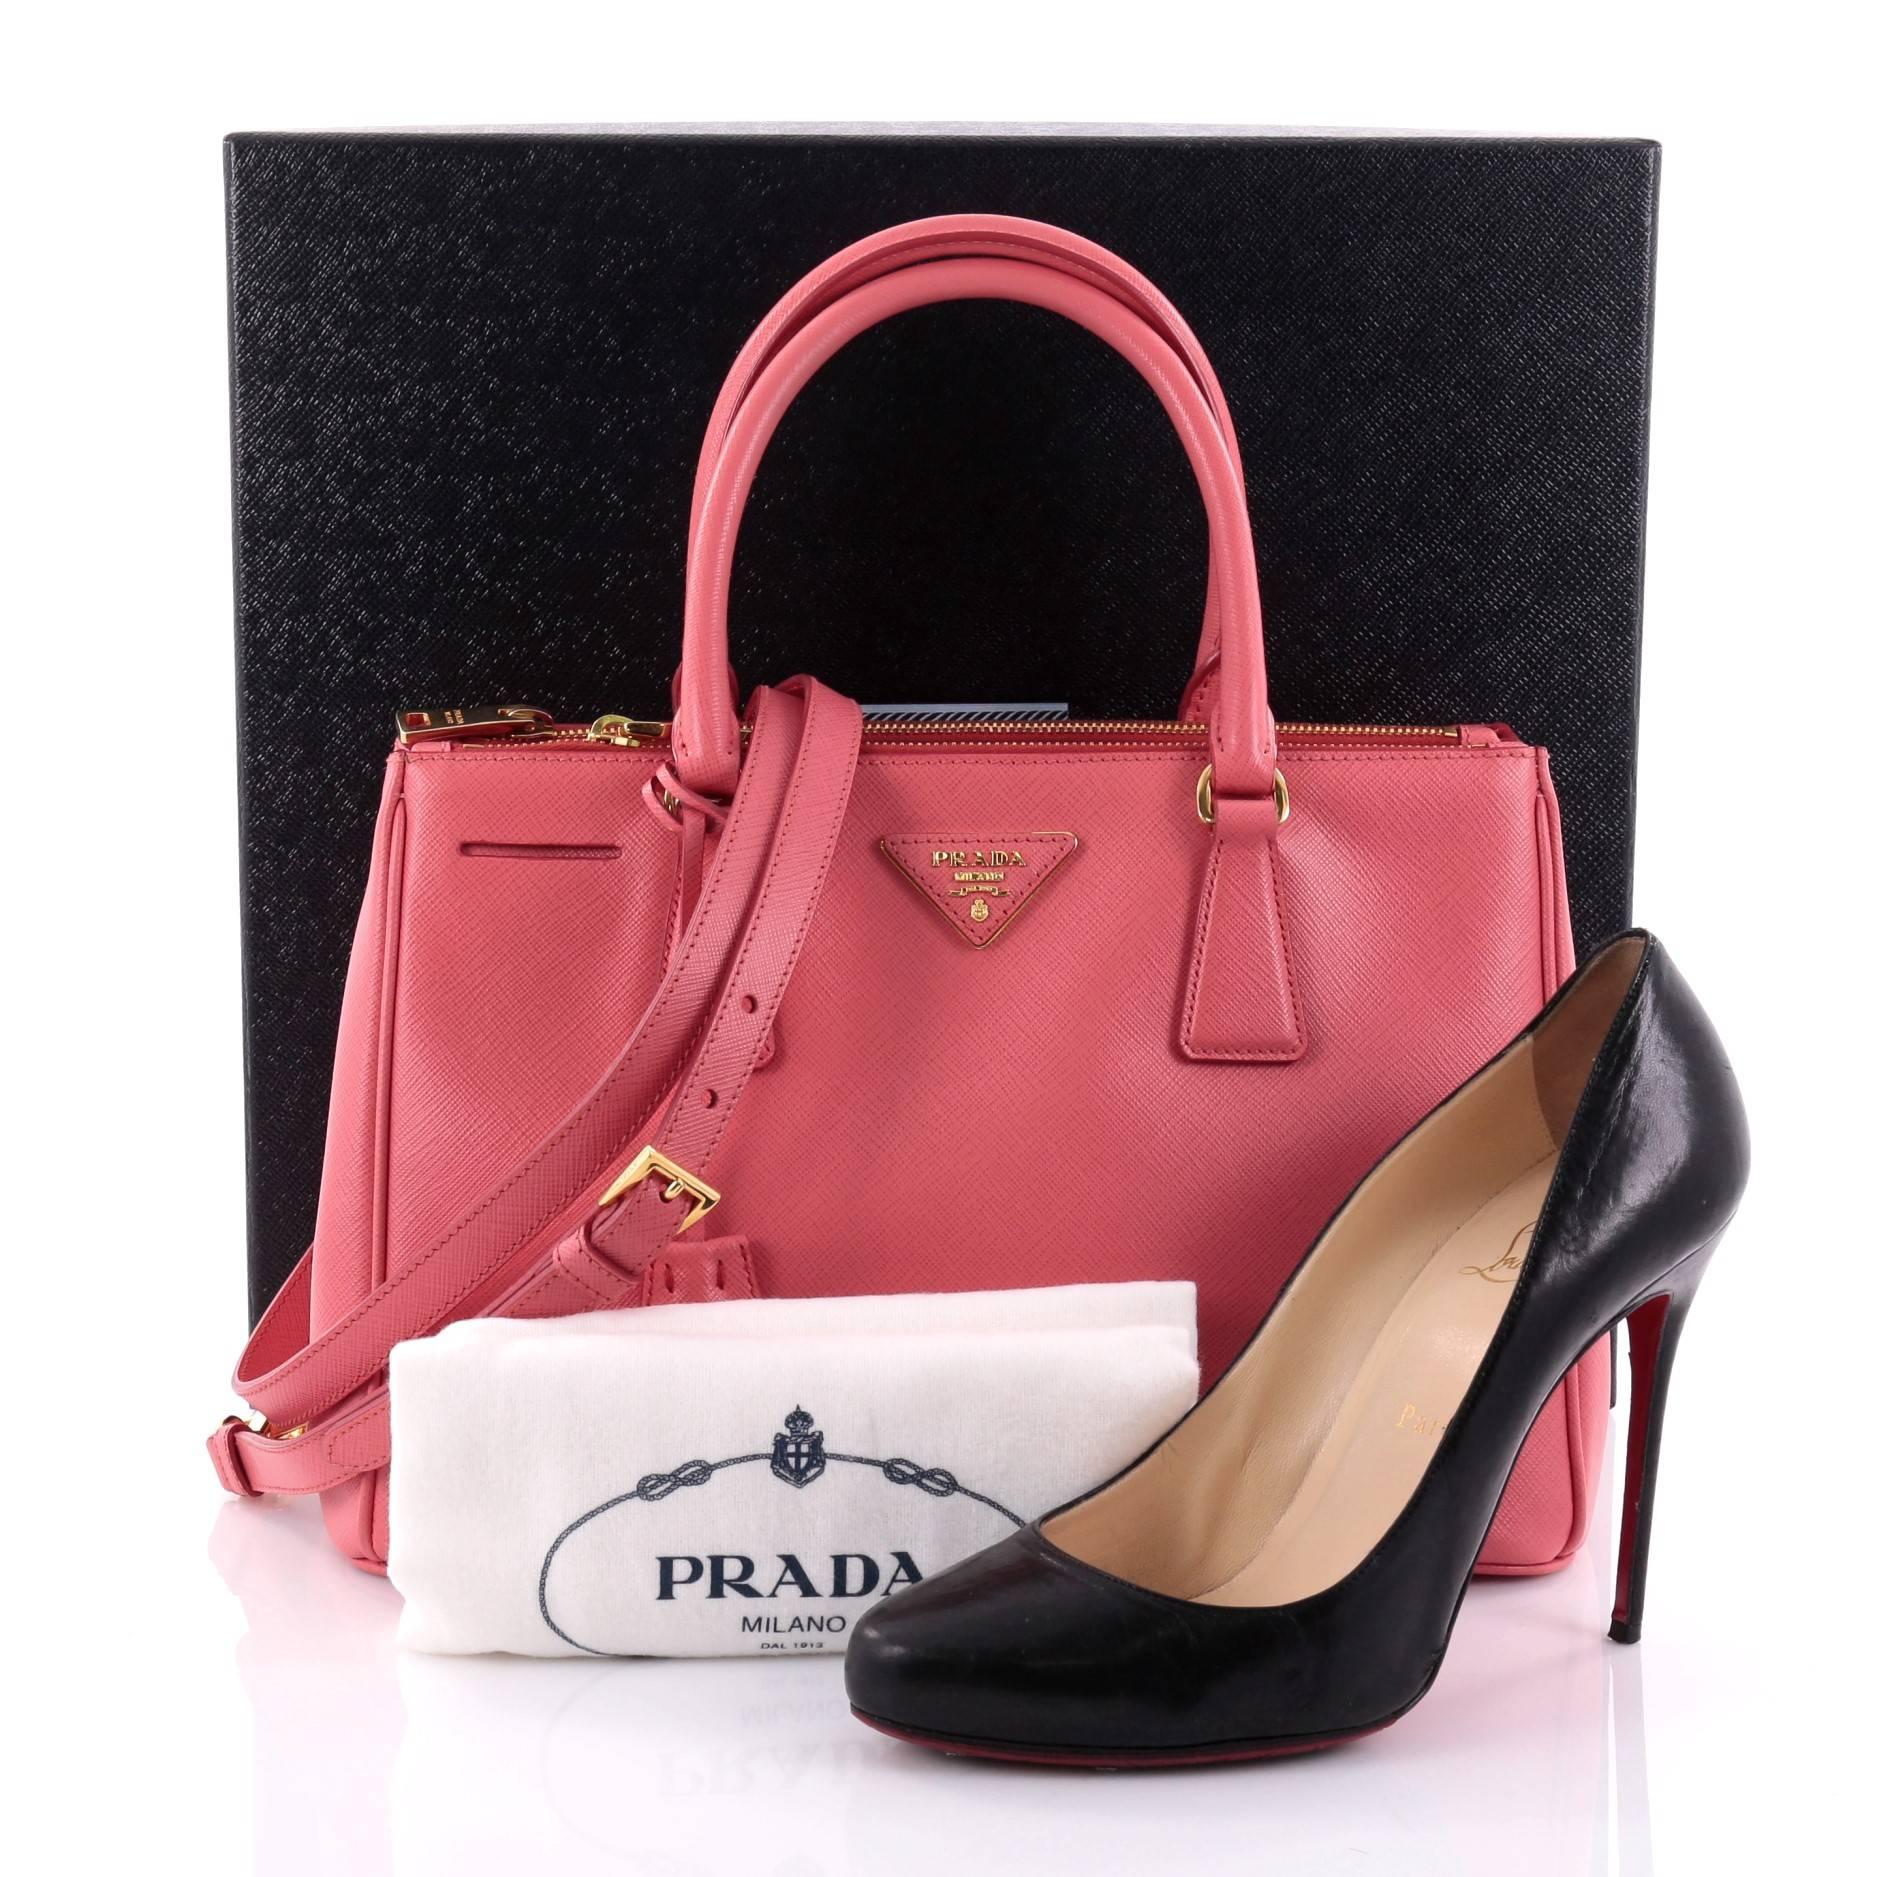 This authentic Prada Double Zip Lux Tote Saffiano Leather Medium is the perfect bag to complete any outfit. Crafted from pink saffiano leather, this boxy tote features side snap buttons, raised Prada logo, dual-rolled leather handles and gold-tone